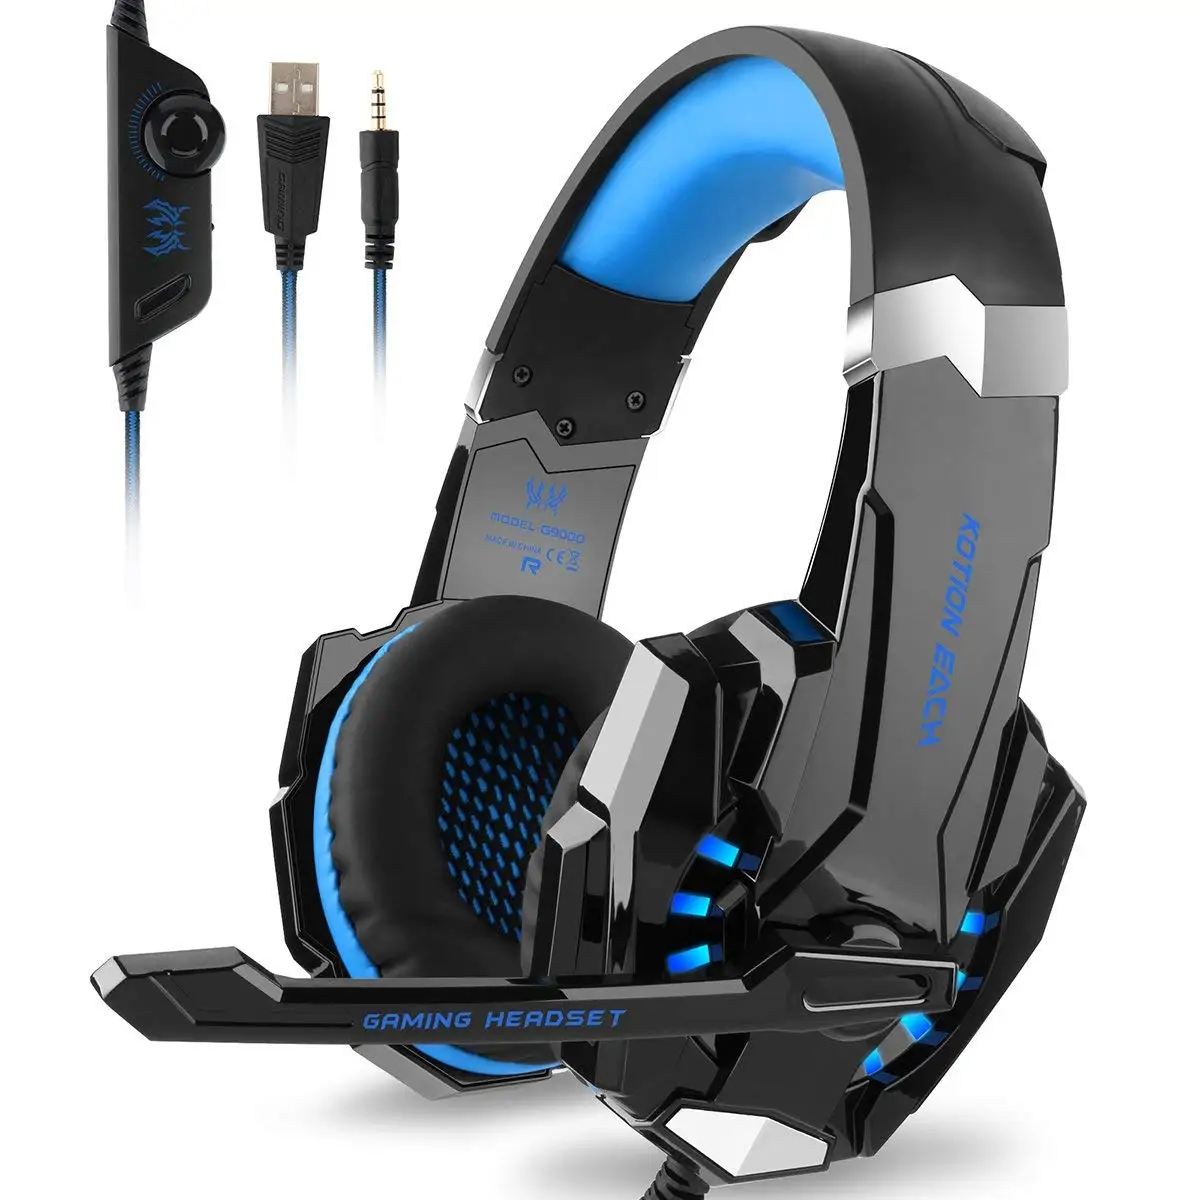 KOTION EACH G9000 Stereo Gaming Headset with LED Light for PS4, PC, Xbox One Controller